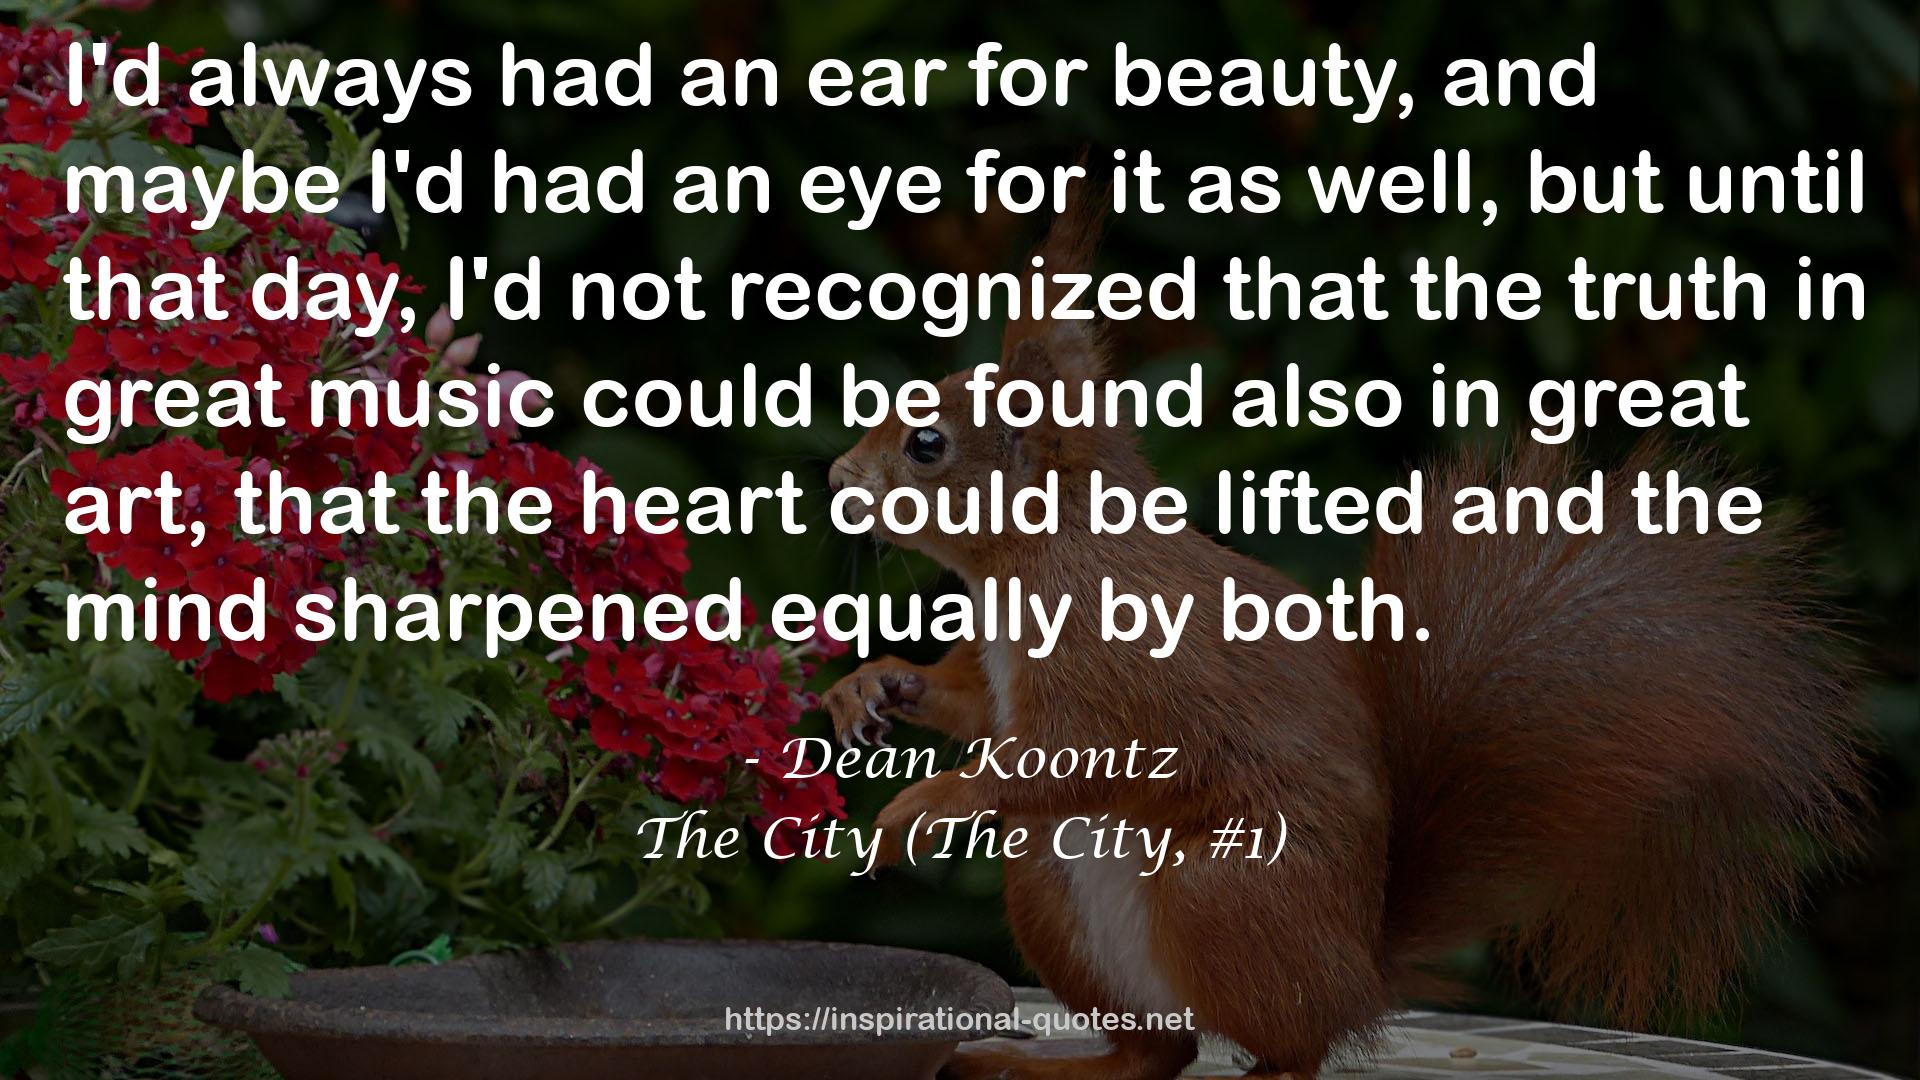 The City (The City, #1) QUOTES